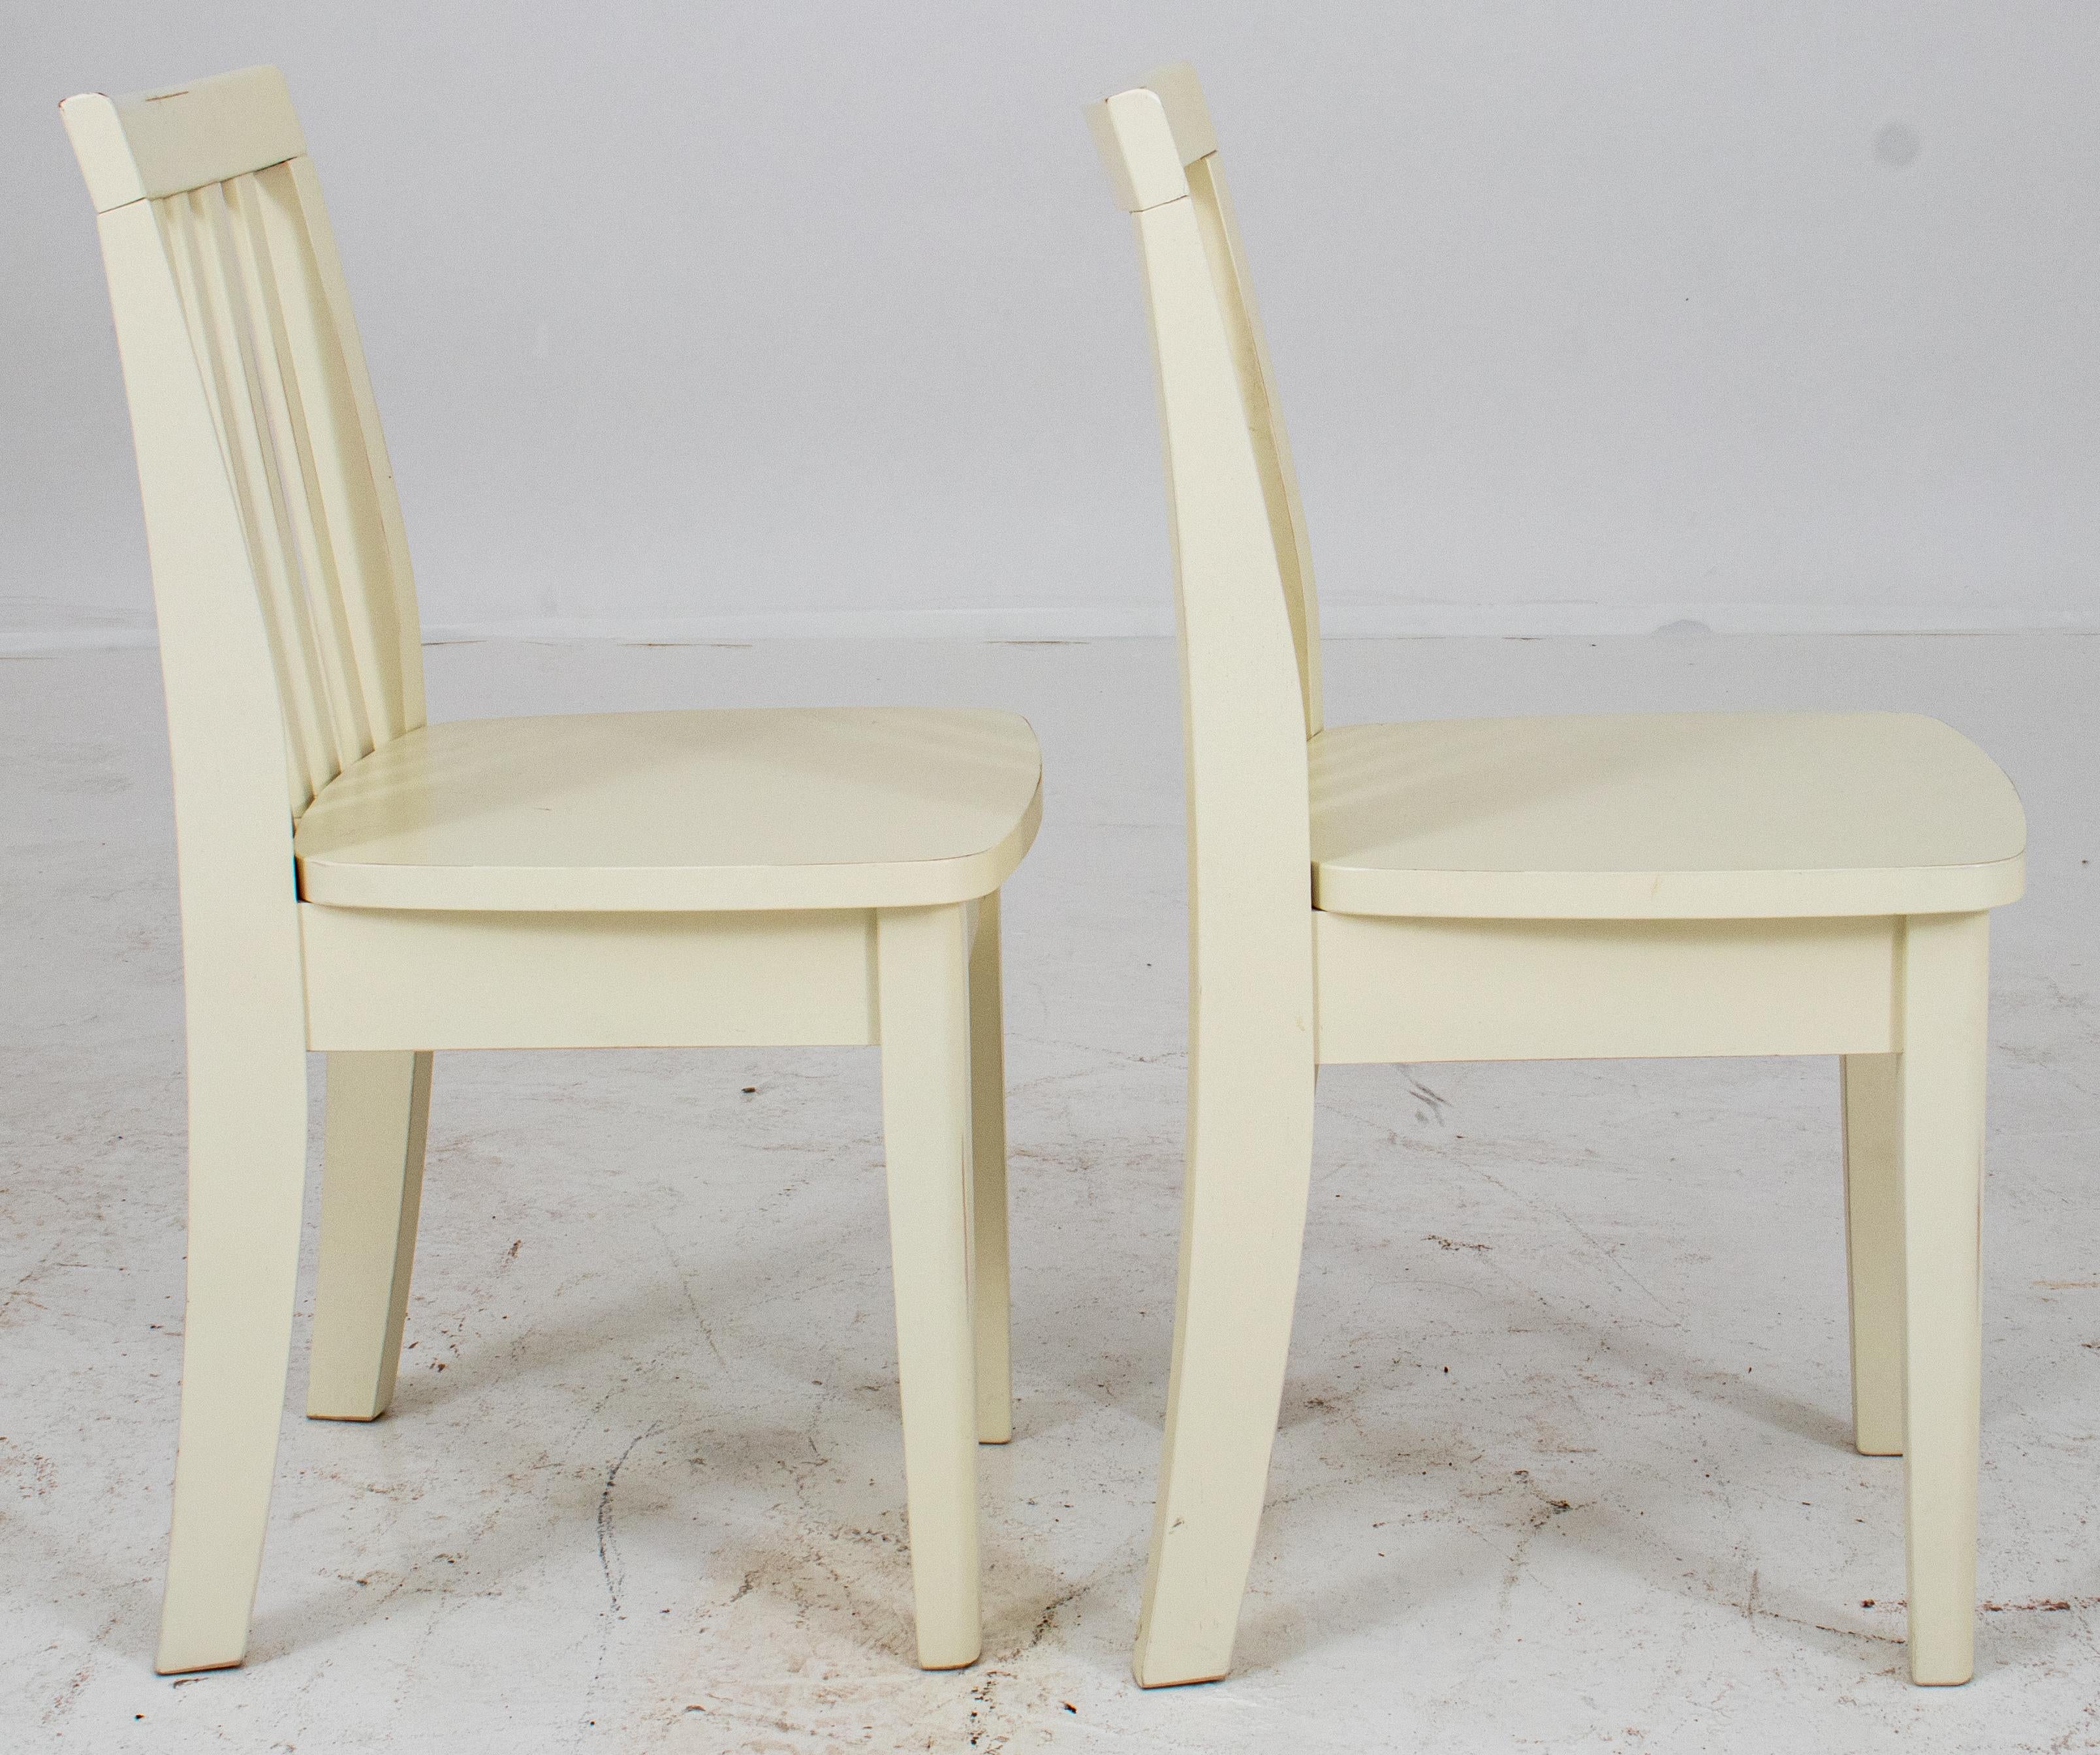 Modern White-Painted Children's Chairs For Sale